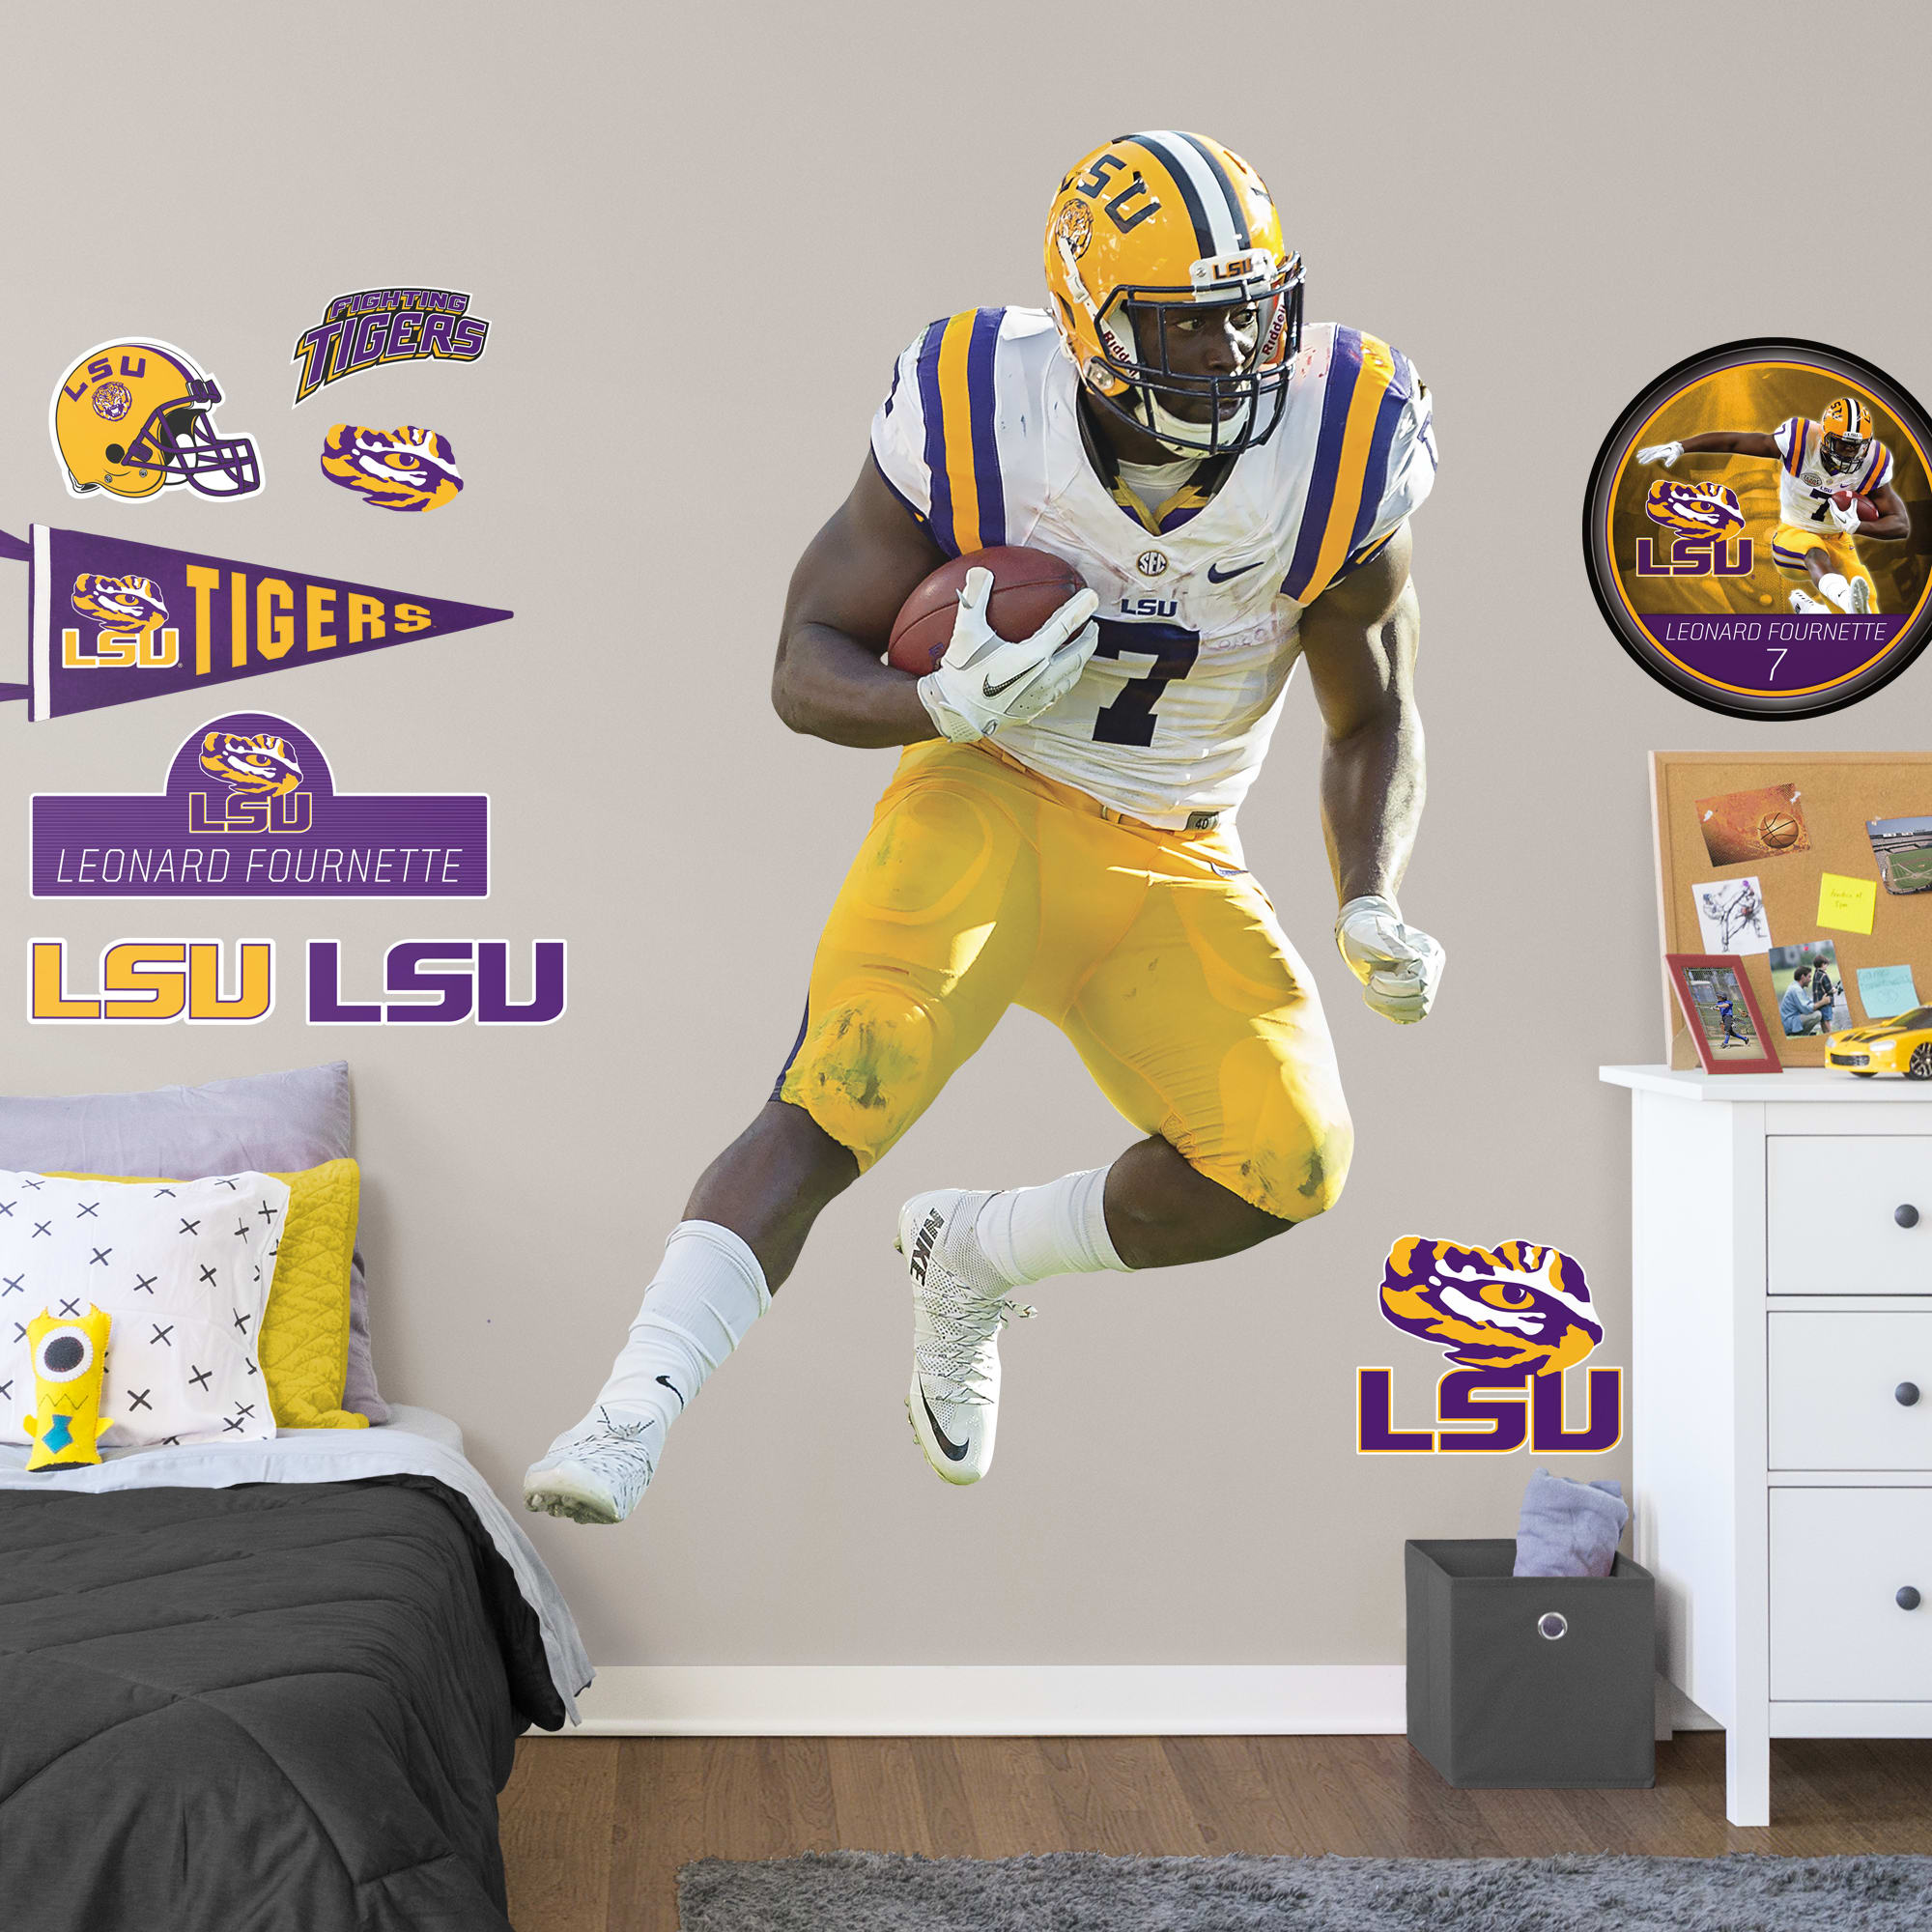 Leonard Fournette for LSU Tigers: LSU - Officially Licensed Removable Wall Decal Life-Size Athlete + 10 Decals (48"W x 73"H) by